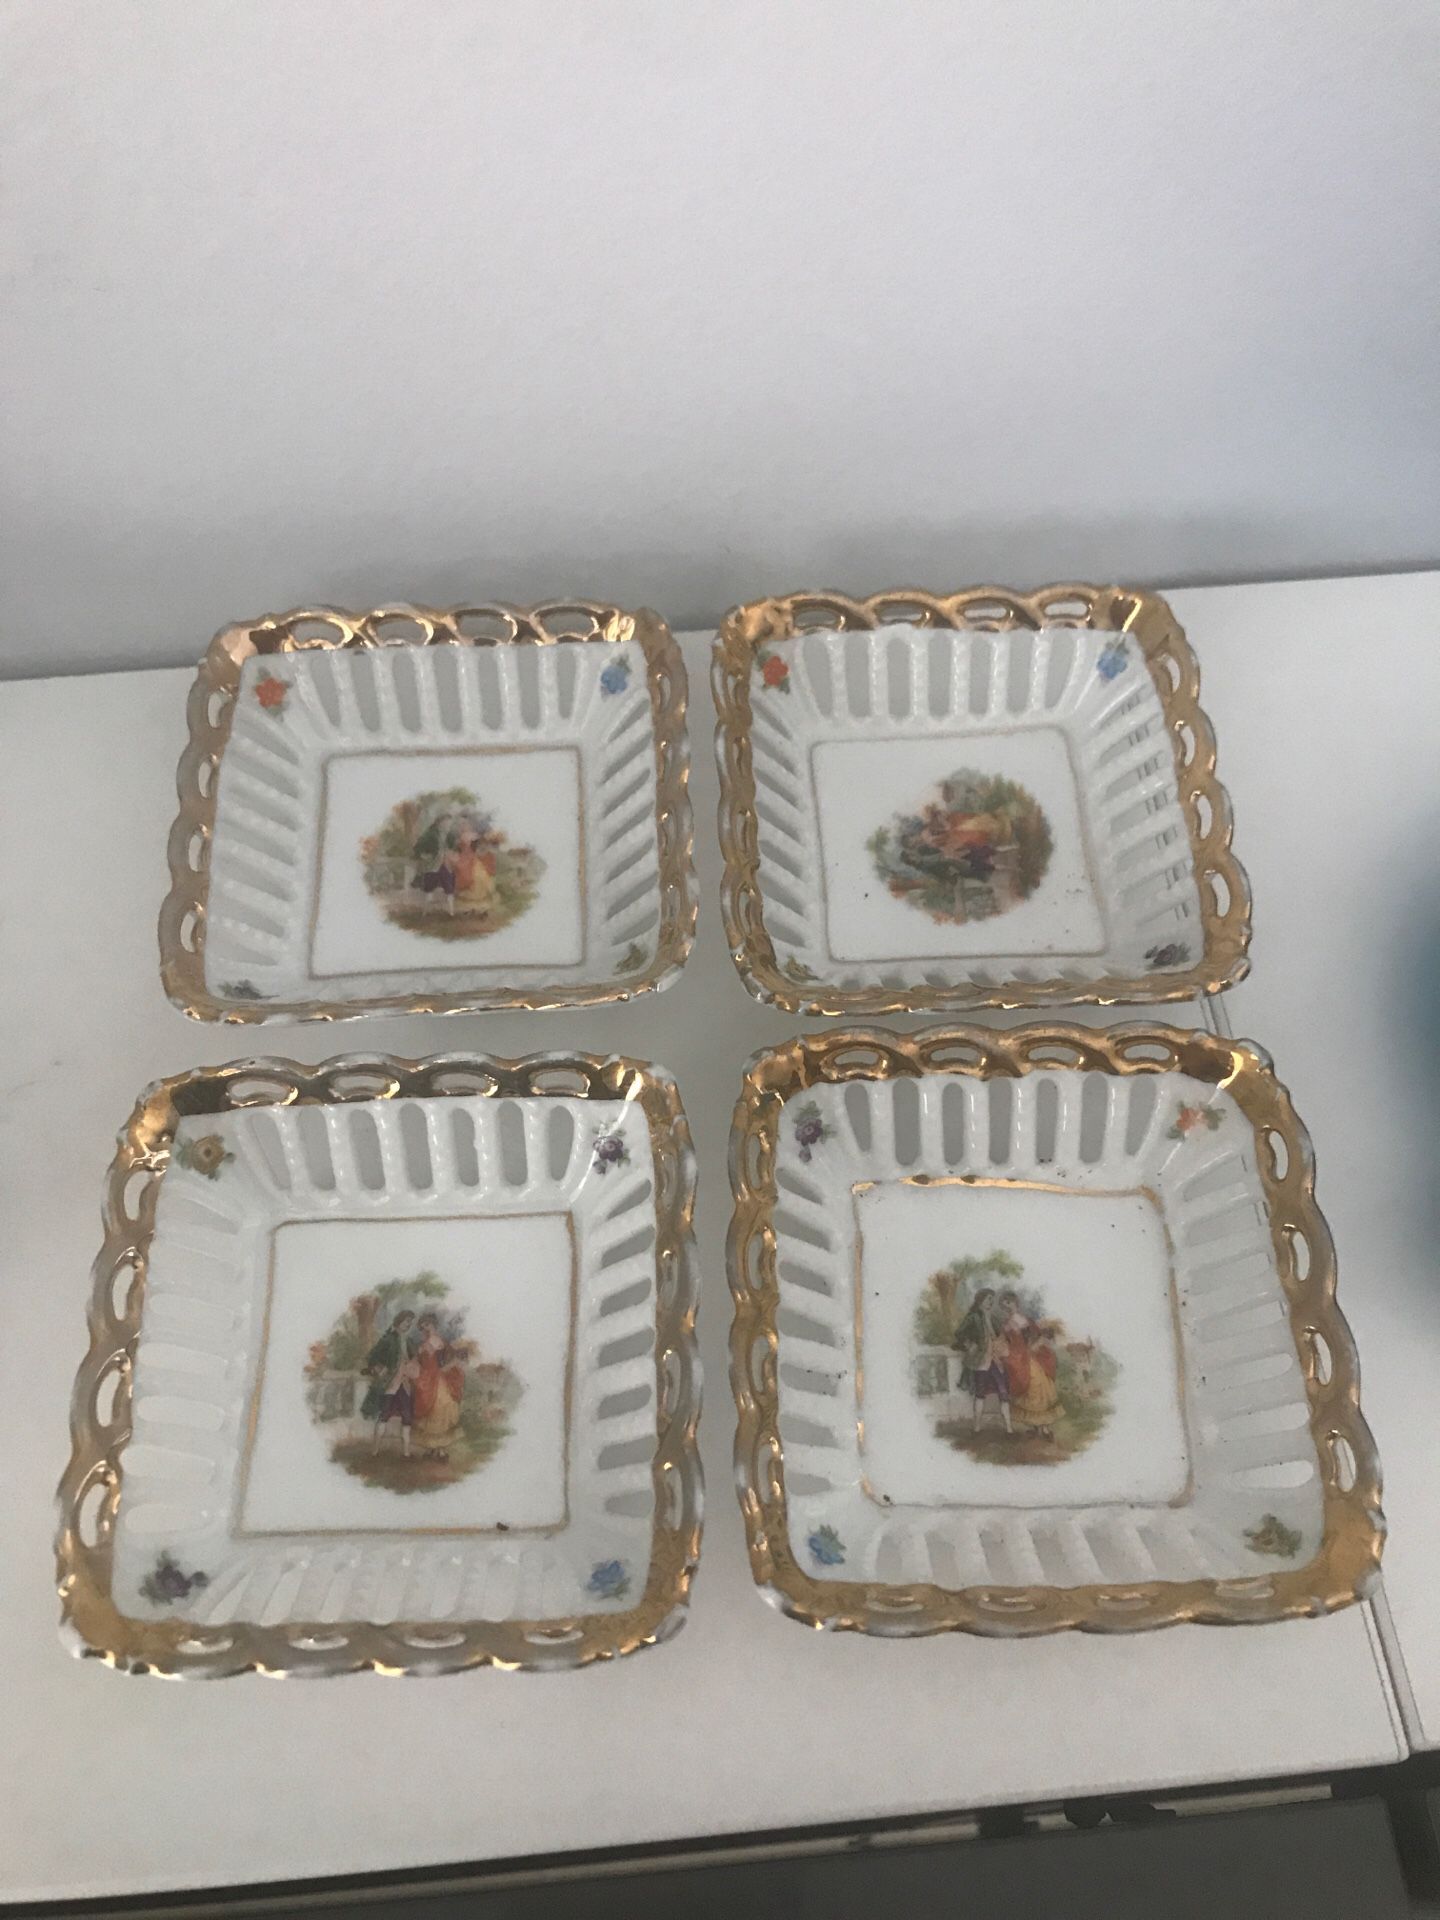 Small vintage plate